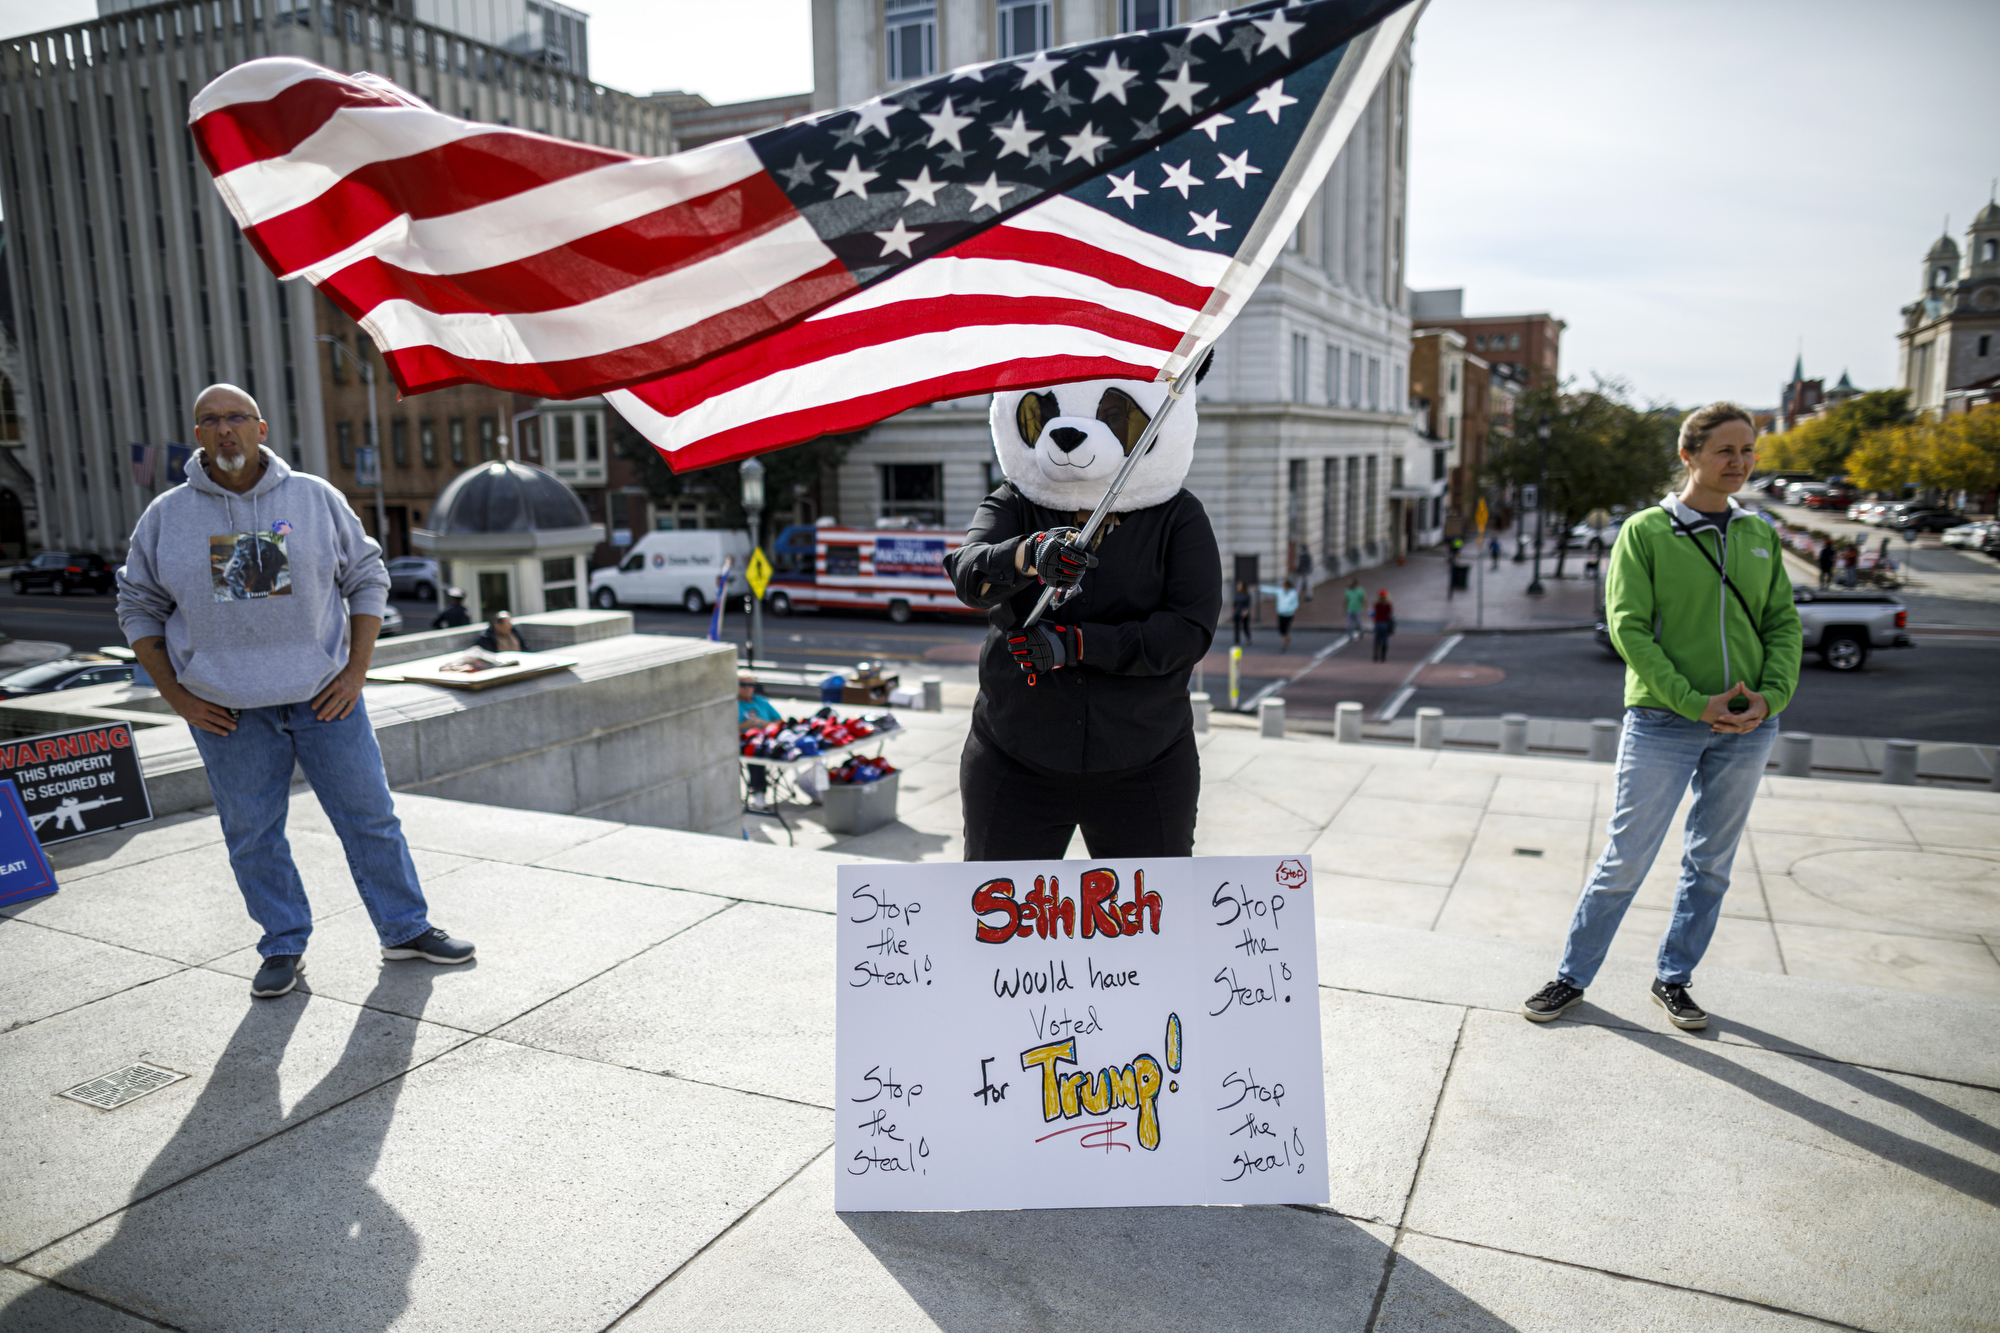 A rally to "Stop the Steal" and to count every legal vote of the election is held at the Pennsylvania state Capitol in Harrisburg, November 5, 2020.
Dan Gleiter | dgleiter@pennlive.com